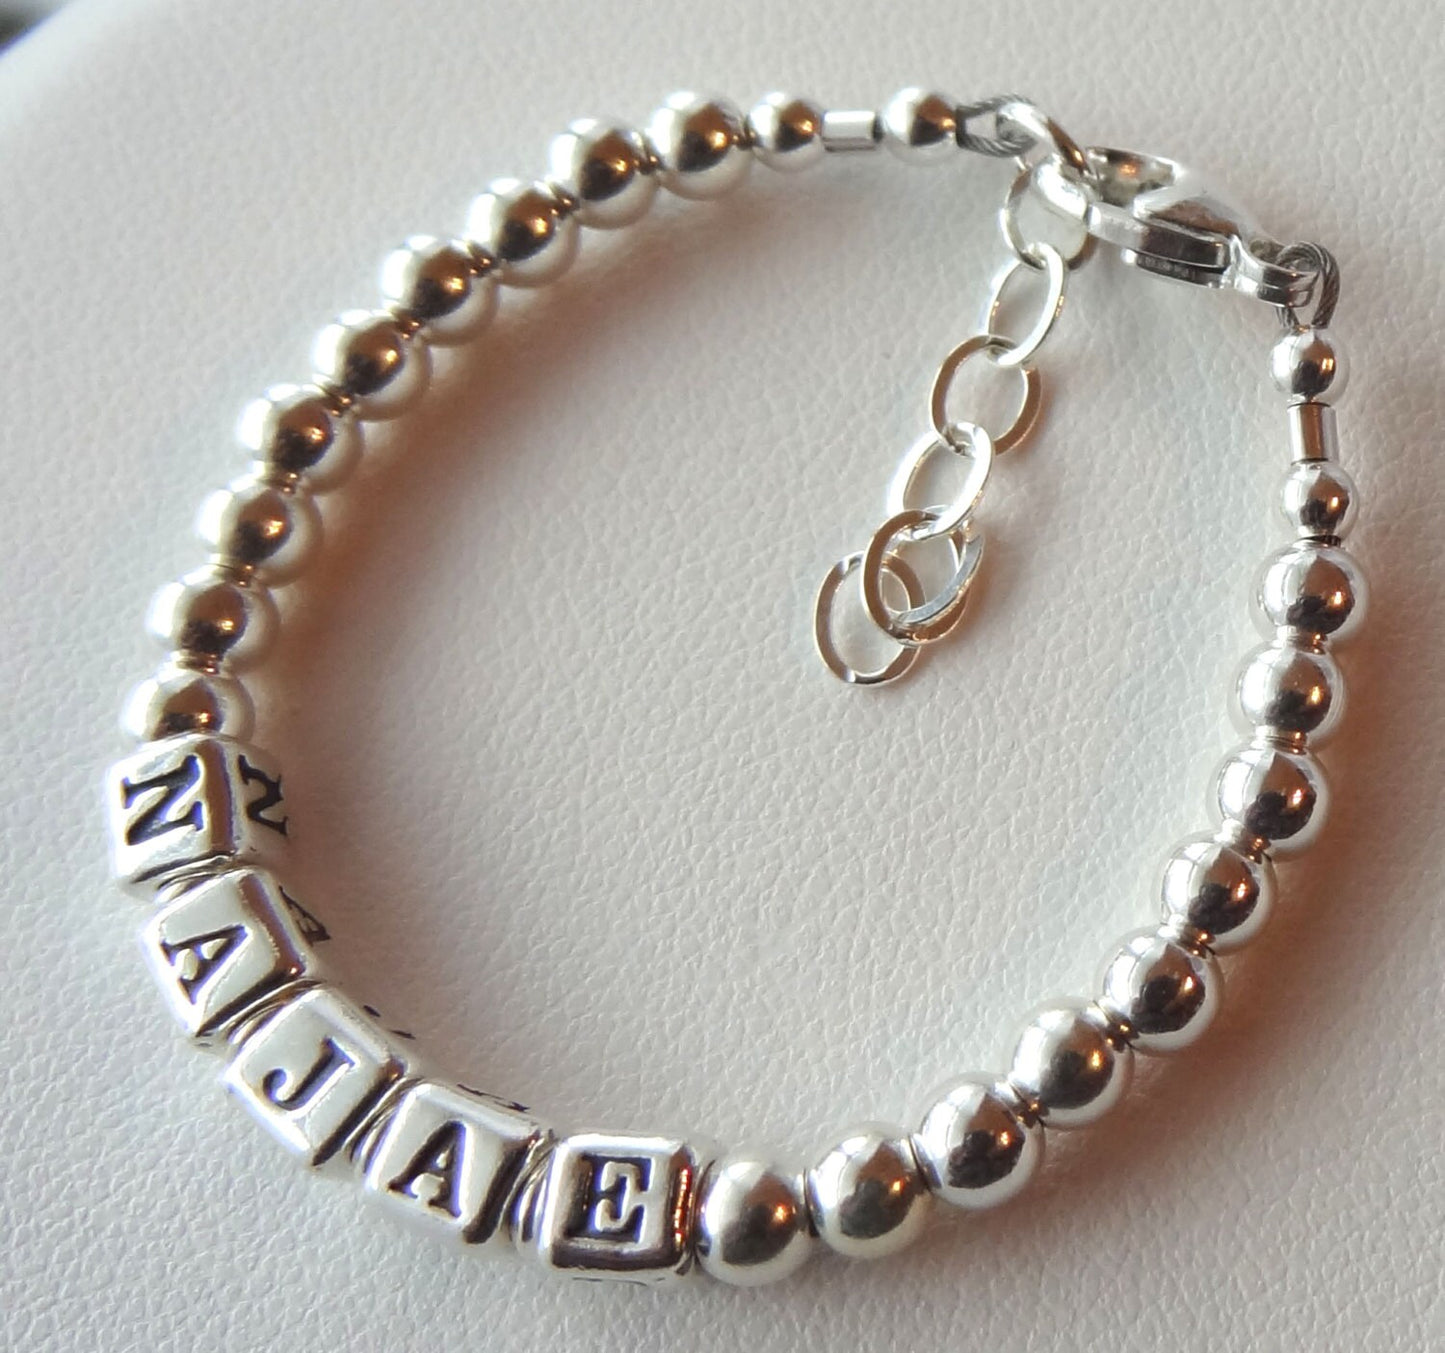 BOY-GIRL-Personalized Silver Baby Name Bracelet,Silver Boy Name Bracelet, Boy Bracelet, Baptism Baby Boy Bracelet, Baby Boy Cross Bracelet